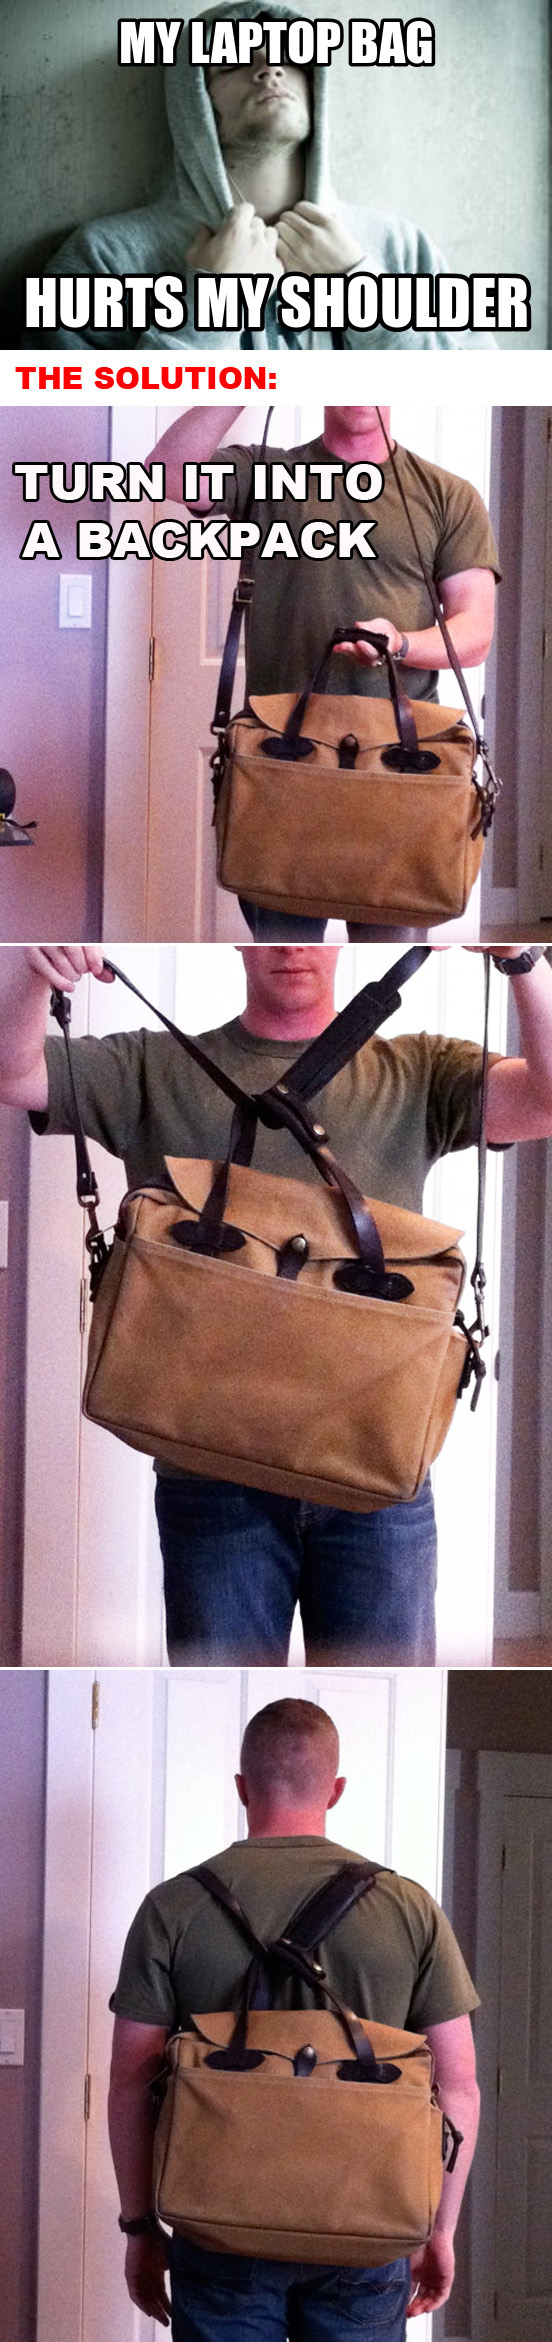 Turn your laptop bag into a backpack.